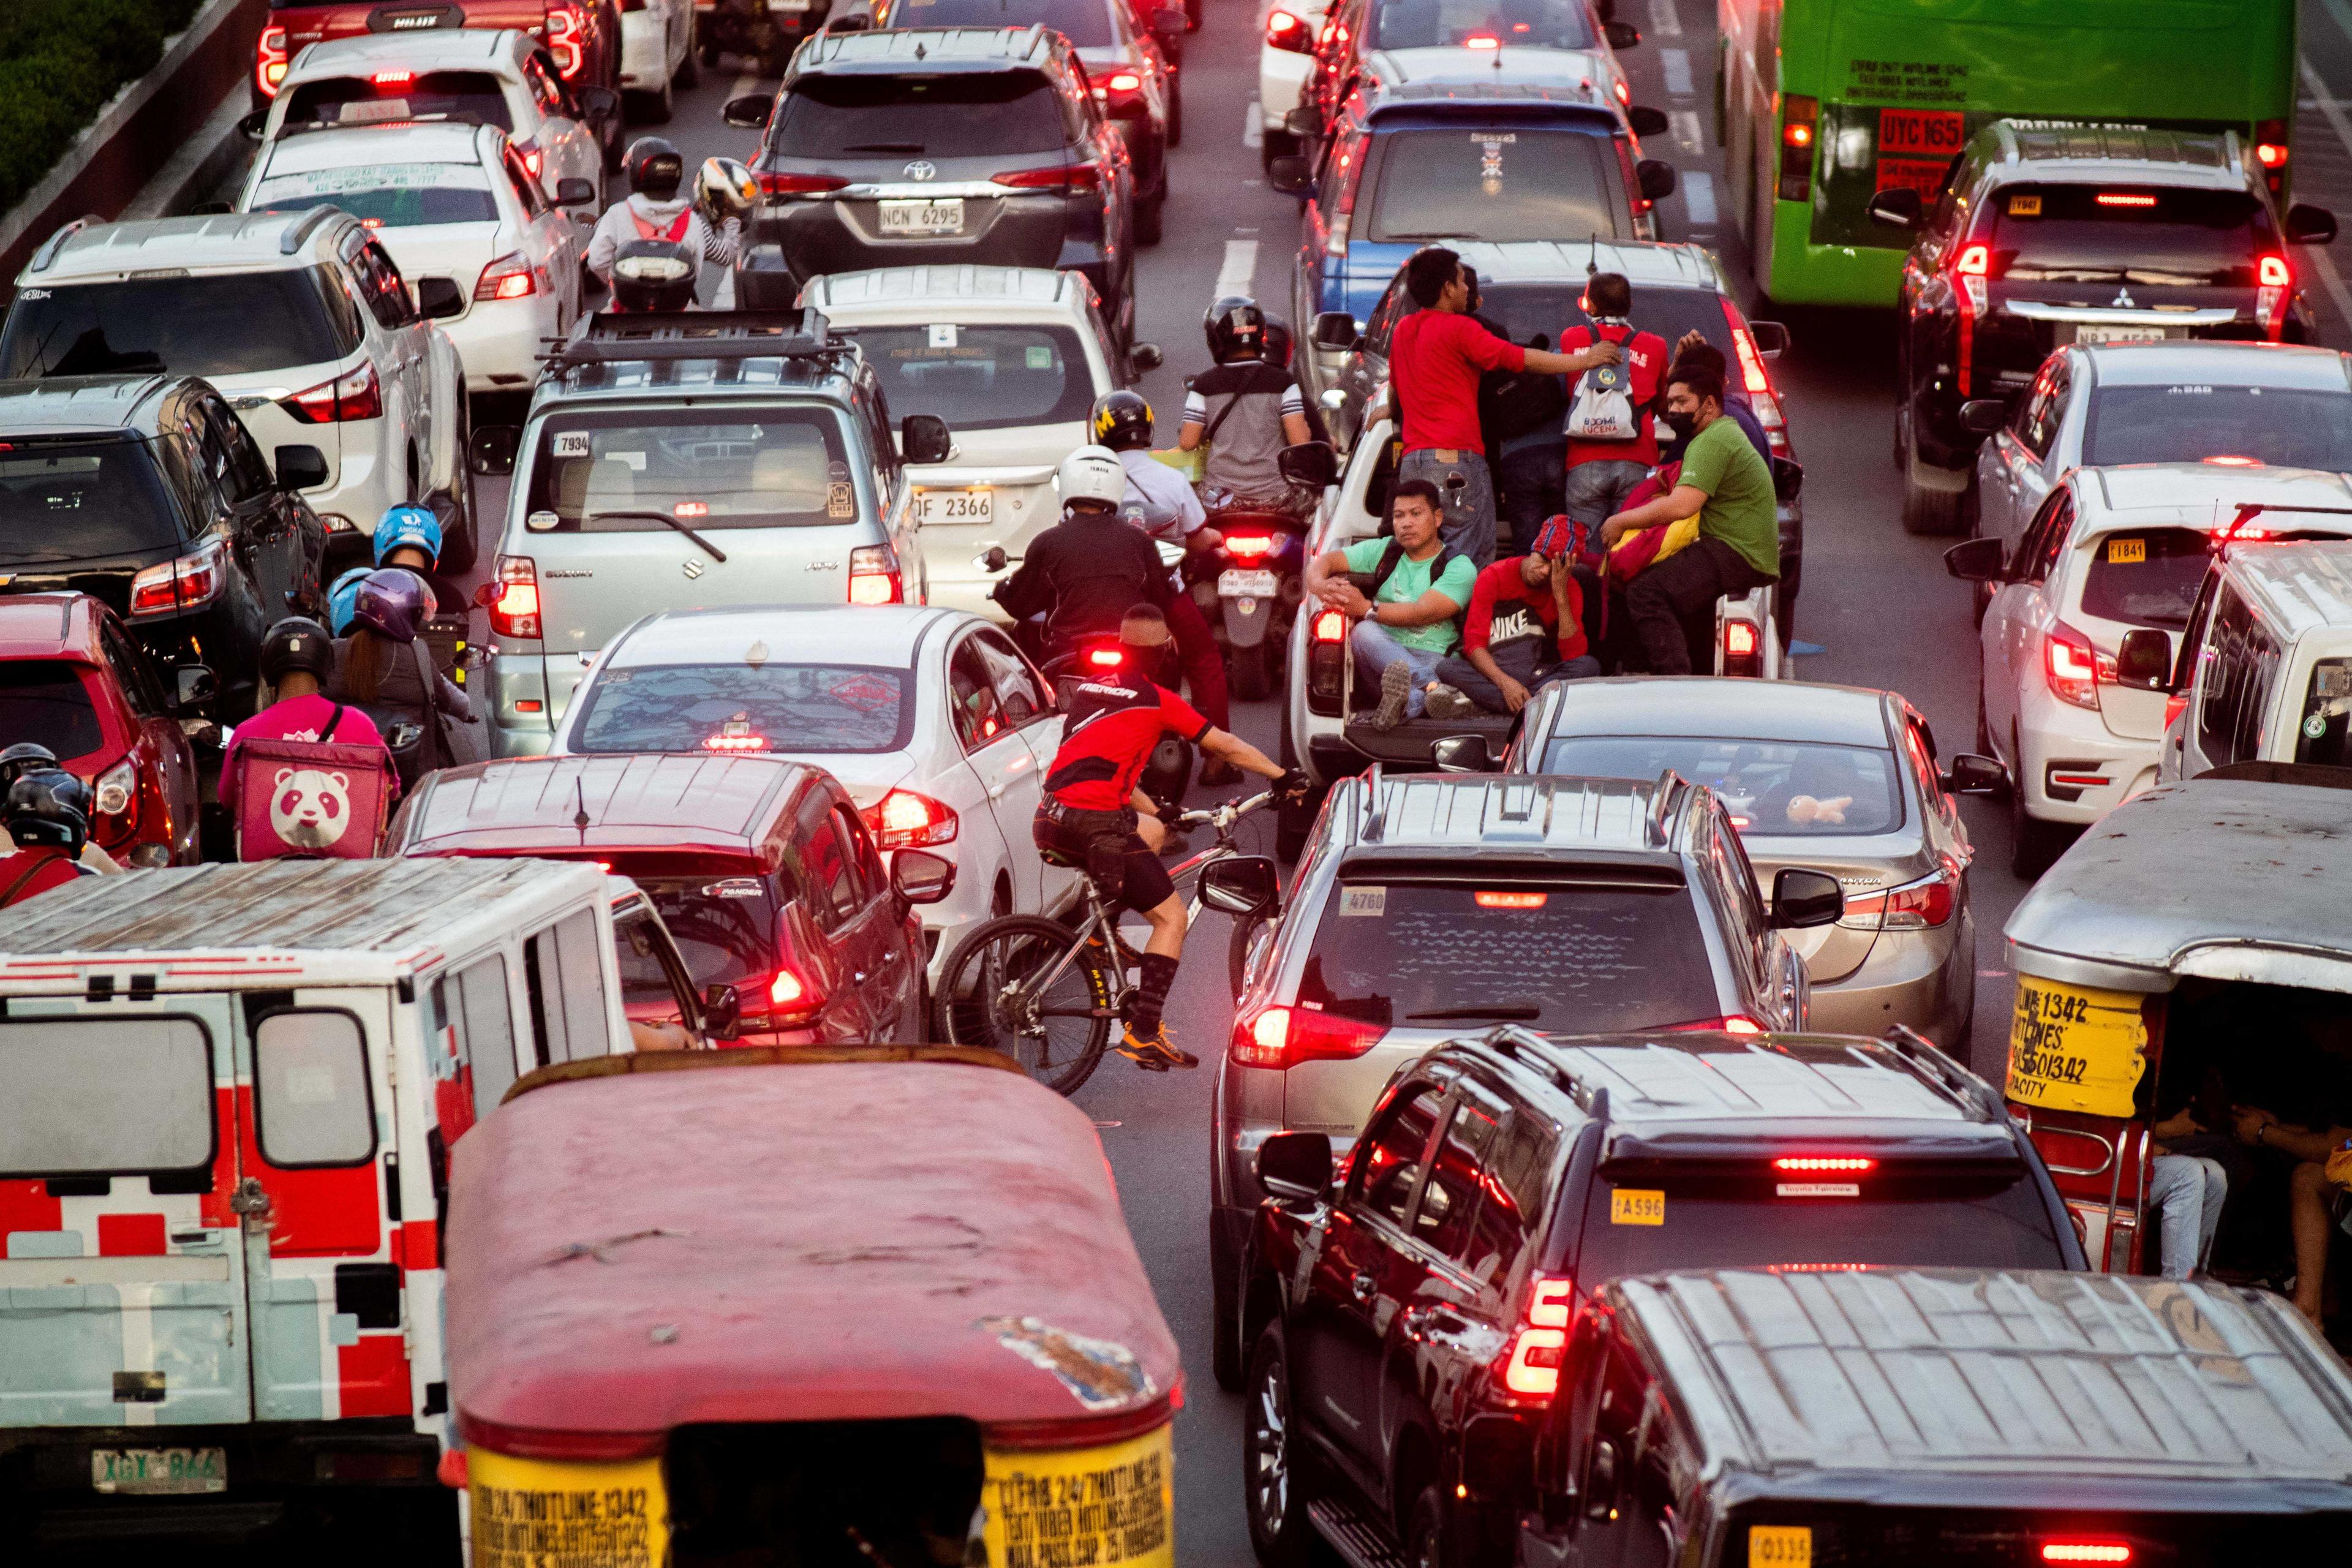 People ride at the back of a pickup car amid heavy traffic as Christmas nears, in Quezon City, Metro Manila, Philippines, Dec 16. Photo: Reuters